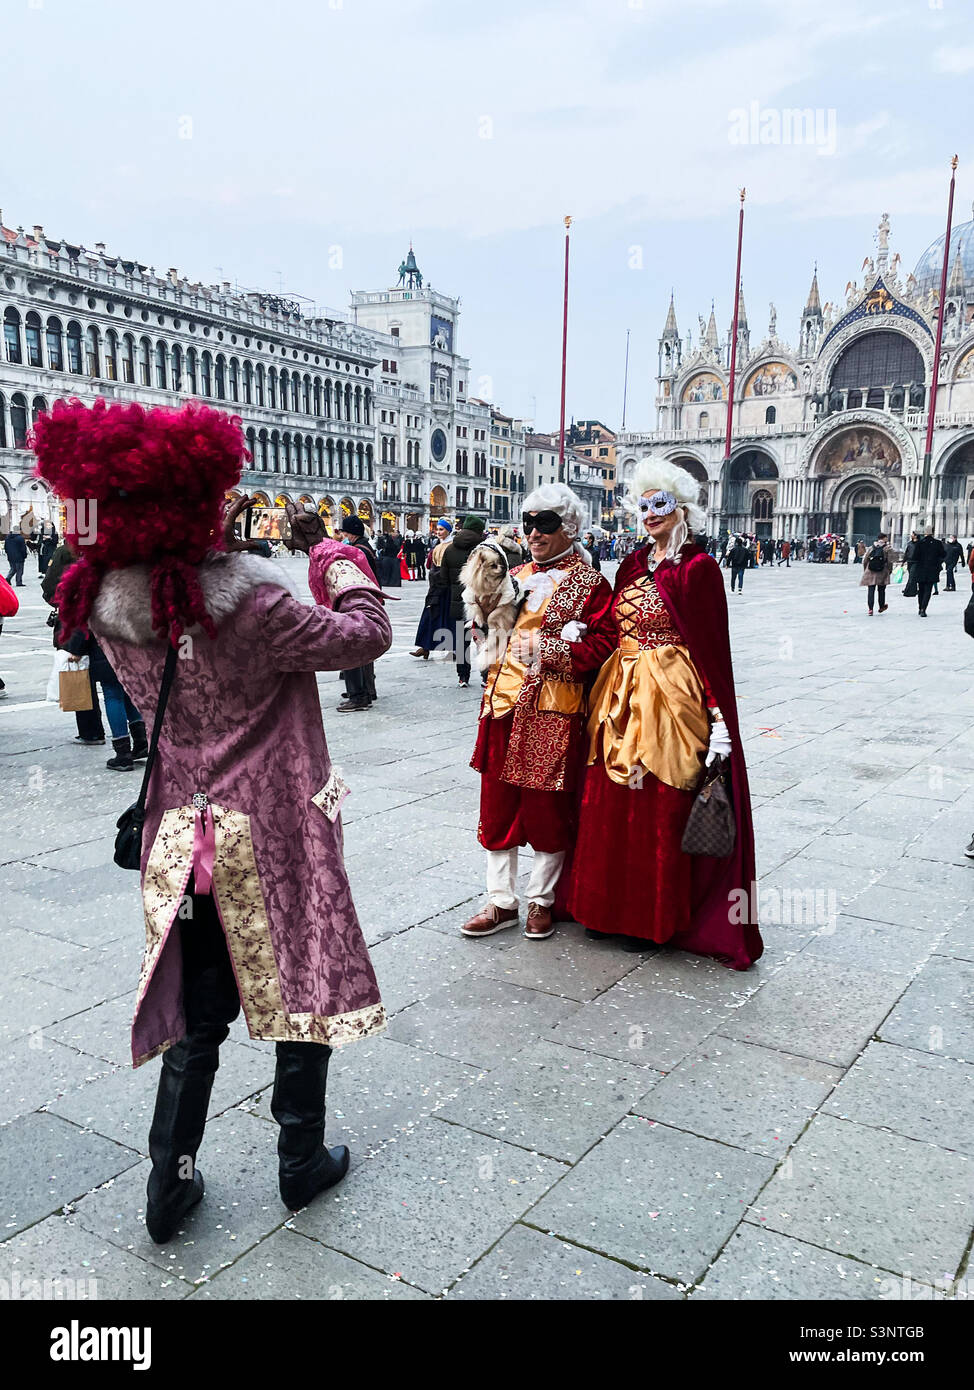 People dressed in historic costumes in St. Mark Square in Venice, Italy  during Carnevale. On man dressed in costume is taking a picture of a couple  also dressed up for the festivities